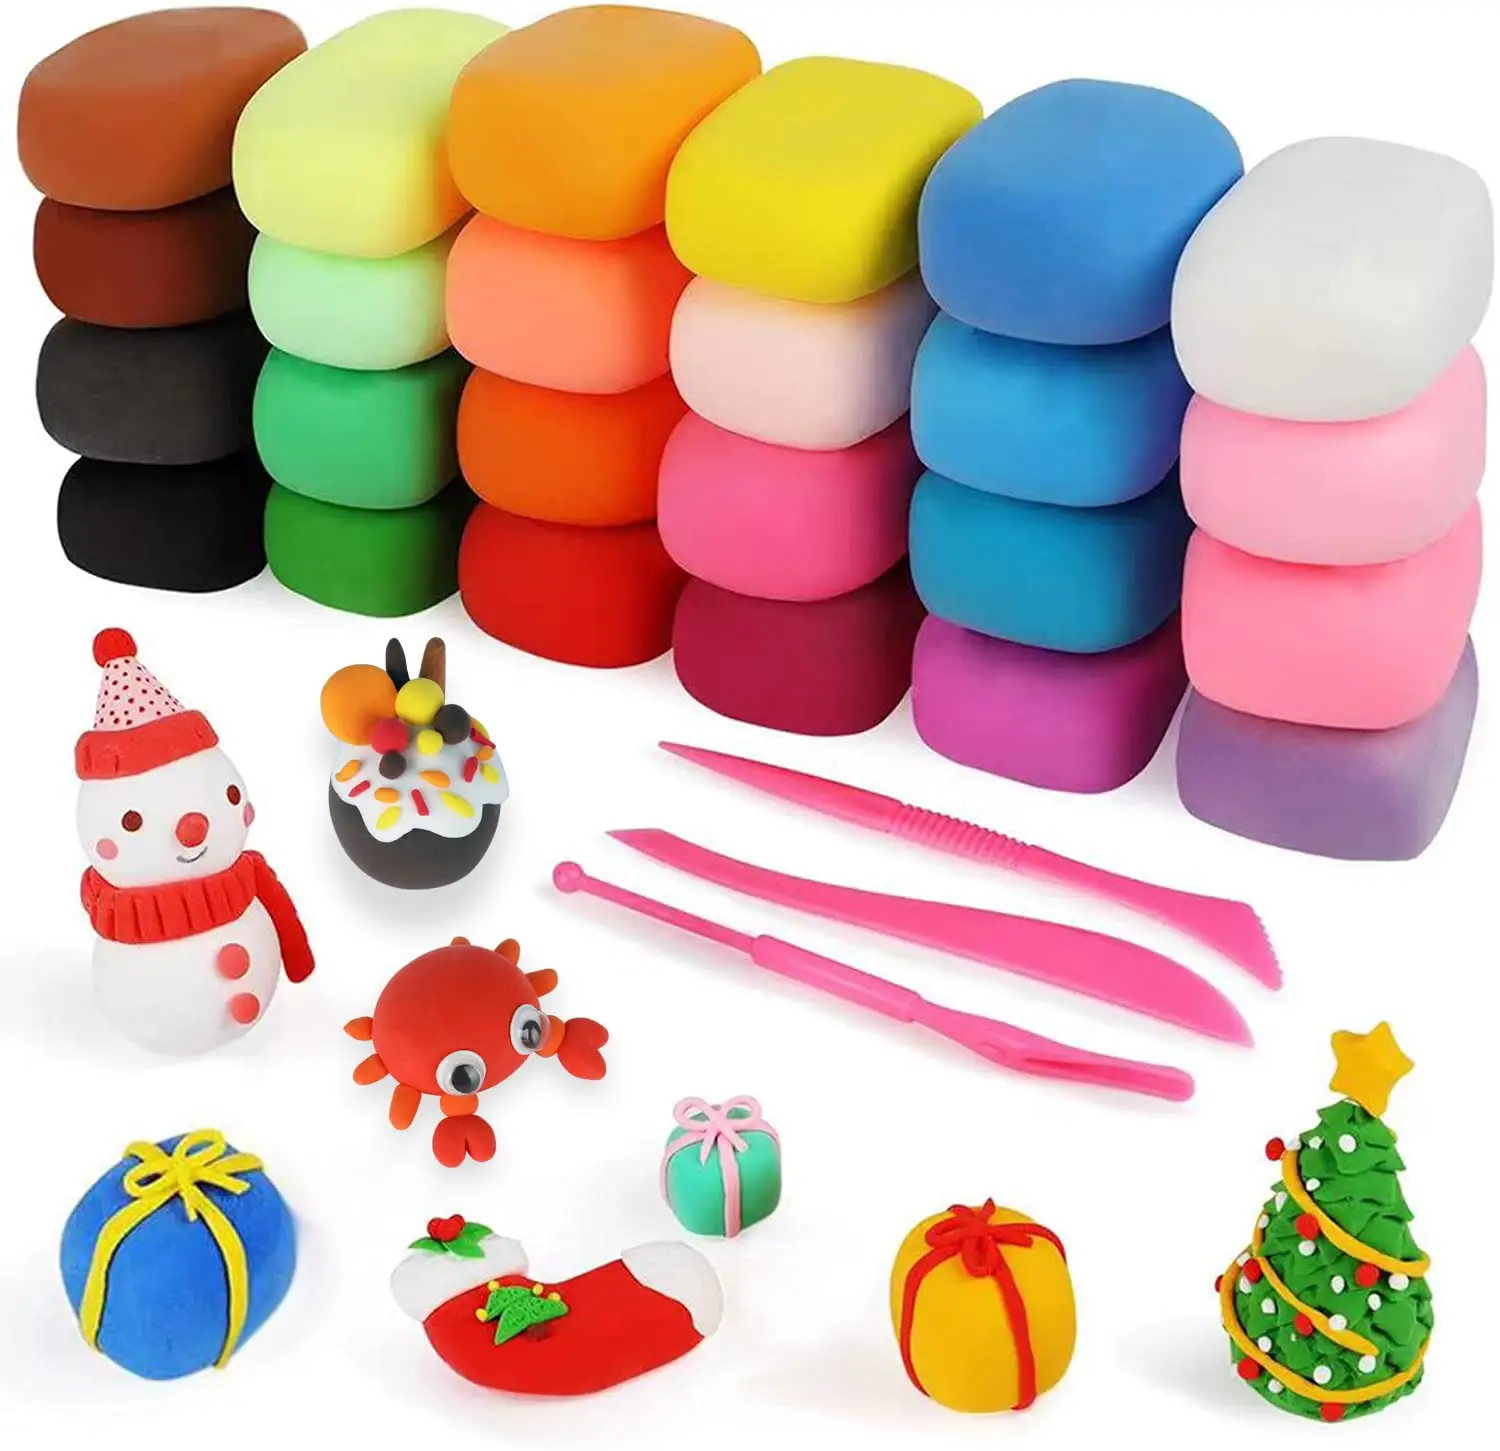 Magic Air Dry Clay for Kids 24 Colors Modeling Clay Kit with Magical Clay Tools